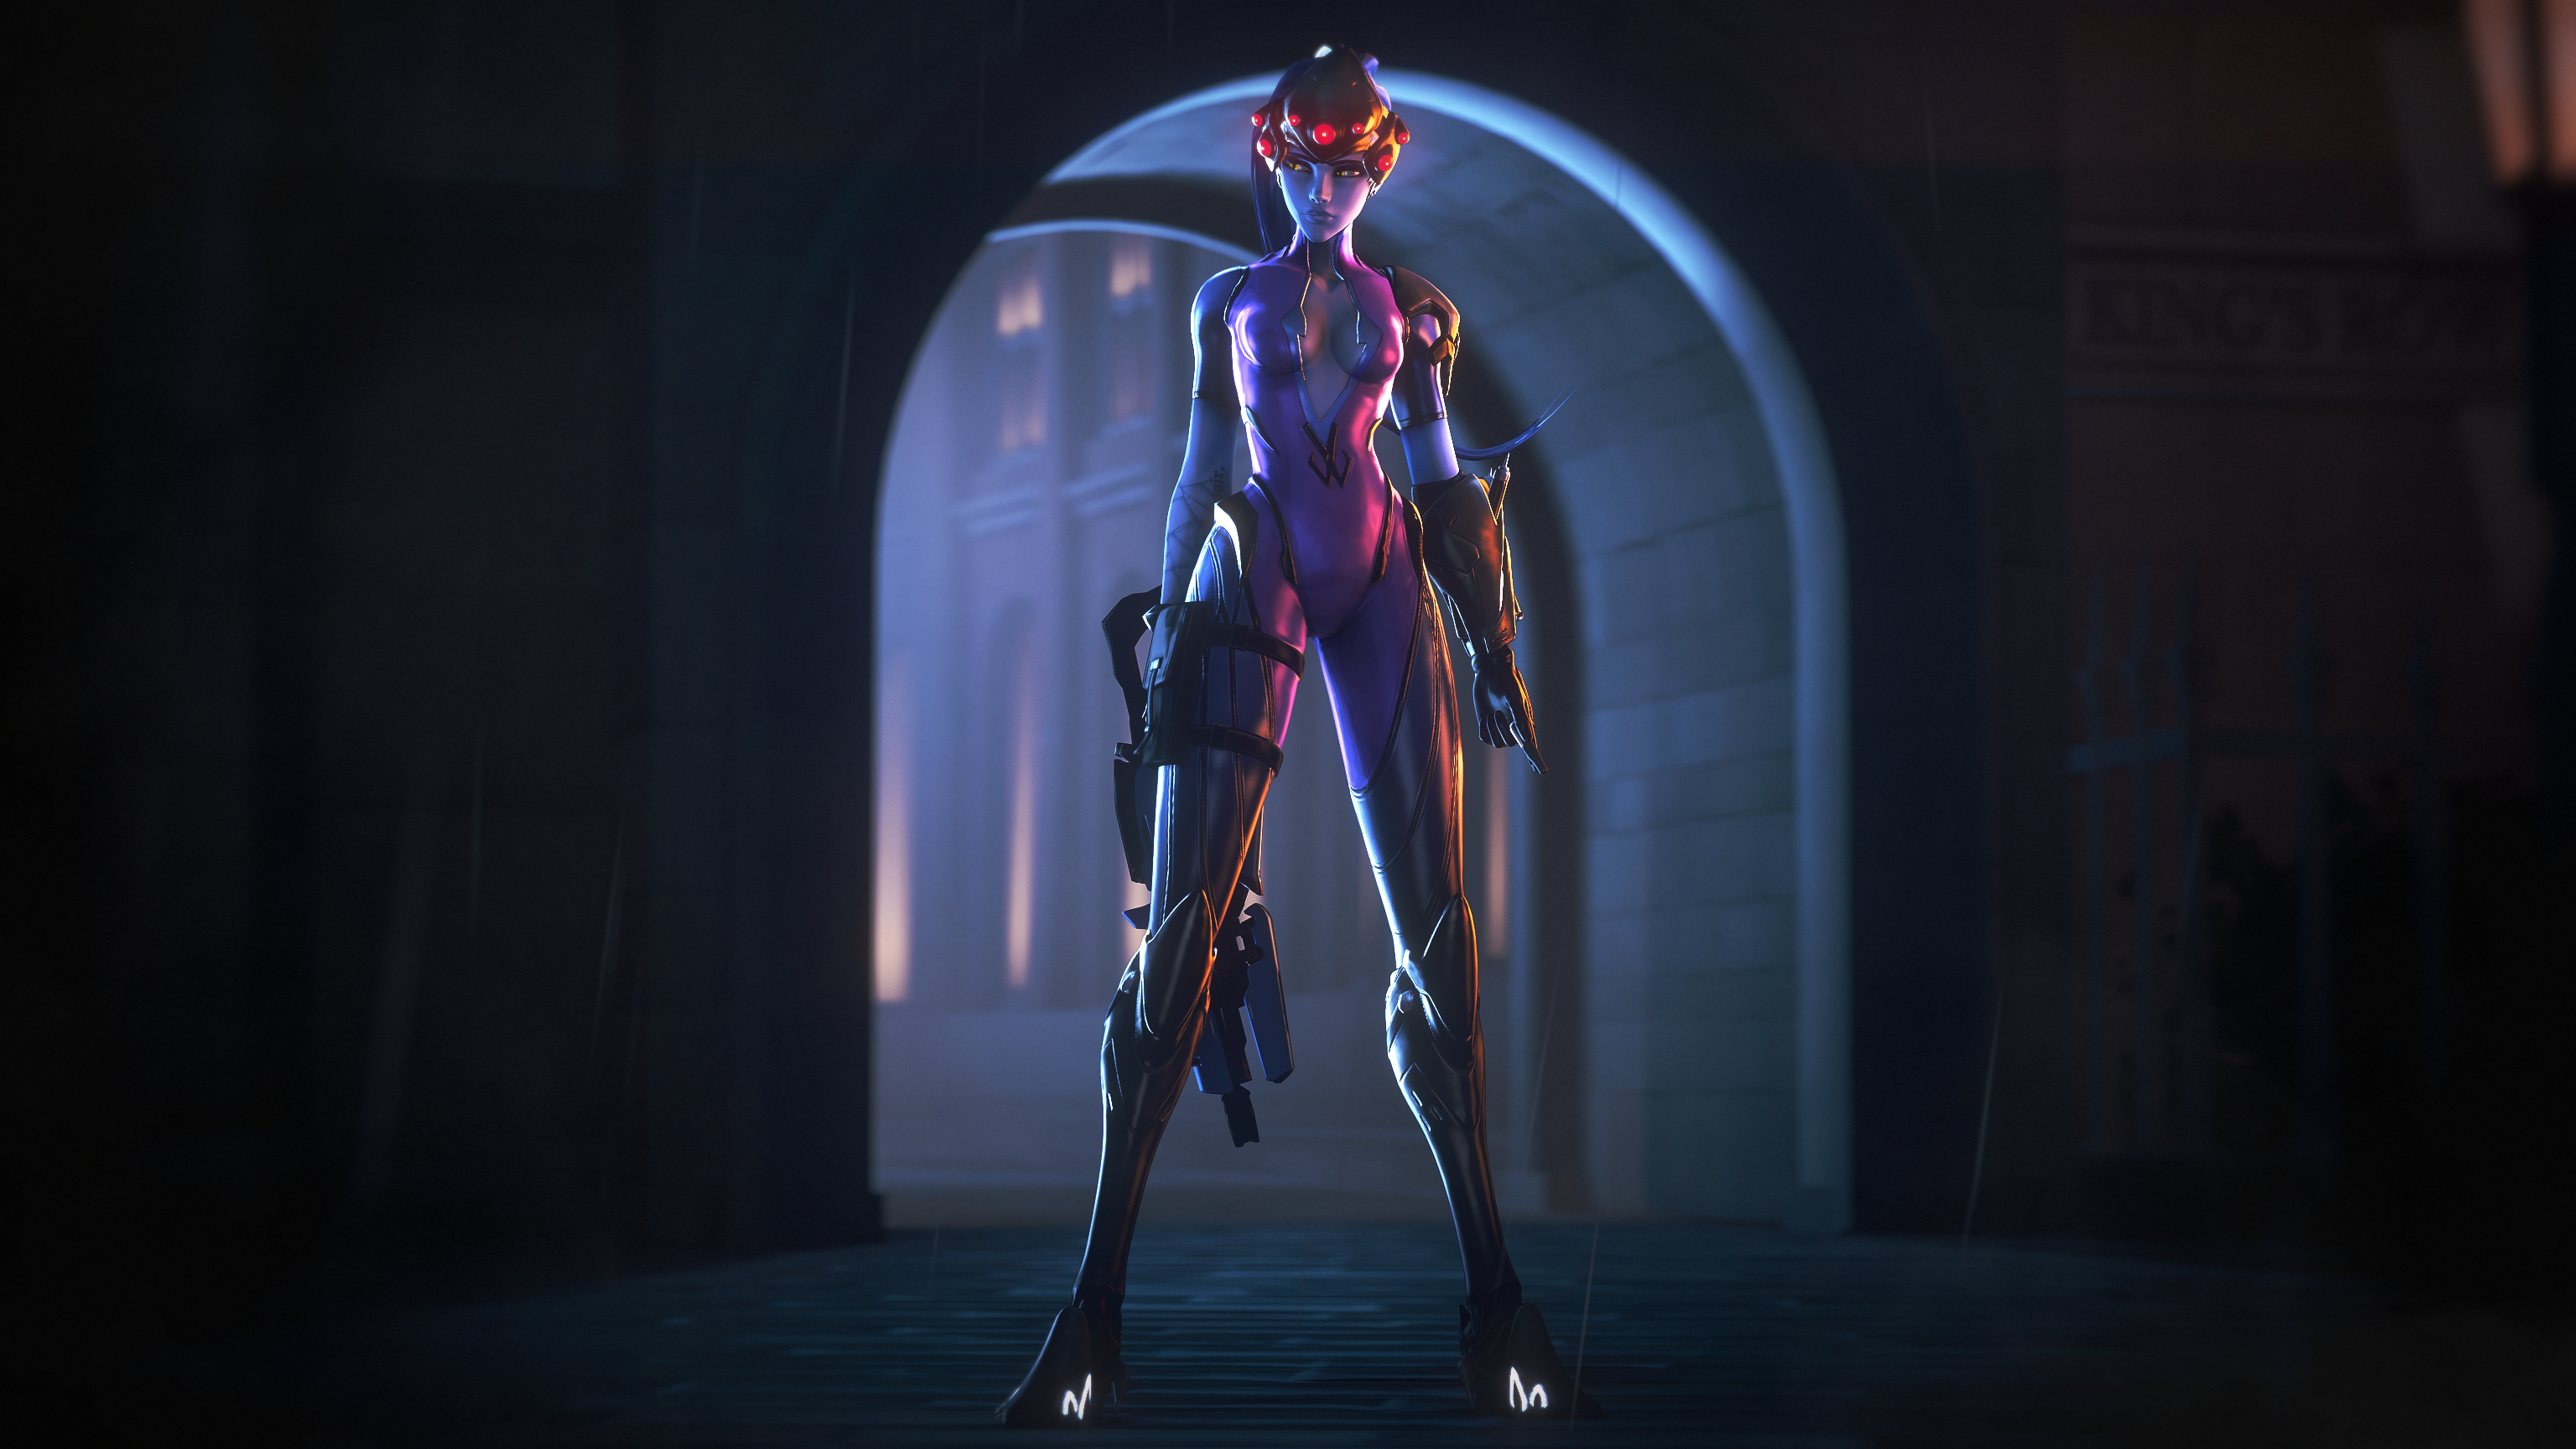 3072x1728 230+ Widowmaker (Overwatch) HD Wallpapers and Backgrounds